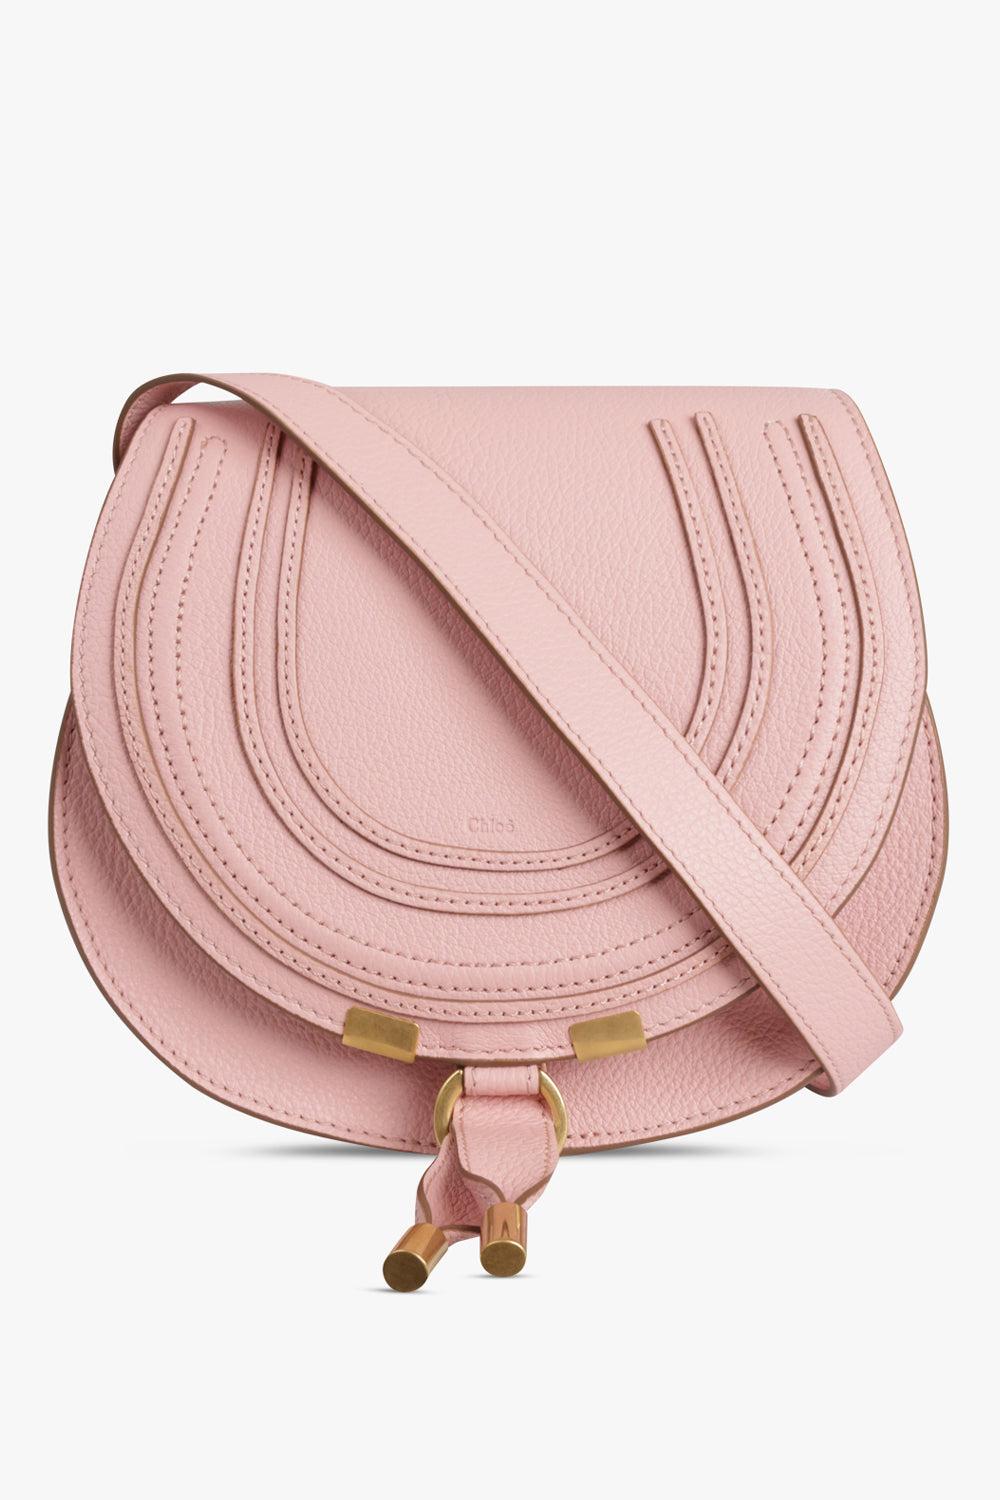 CHLOE BAGS Pink Small Marcie Bag | Blossom Pink